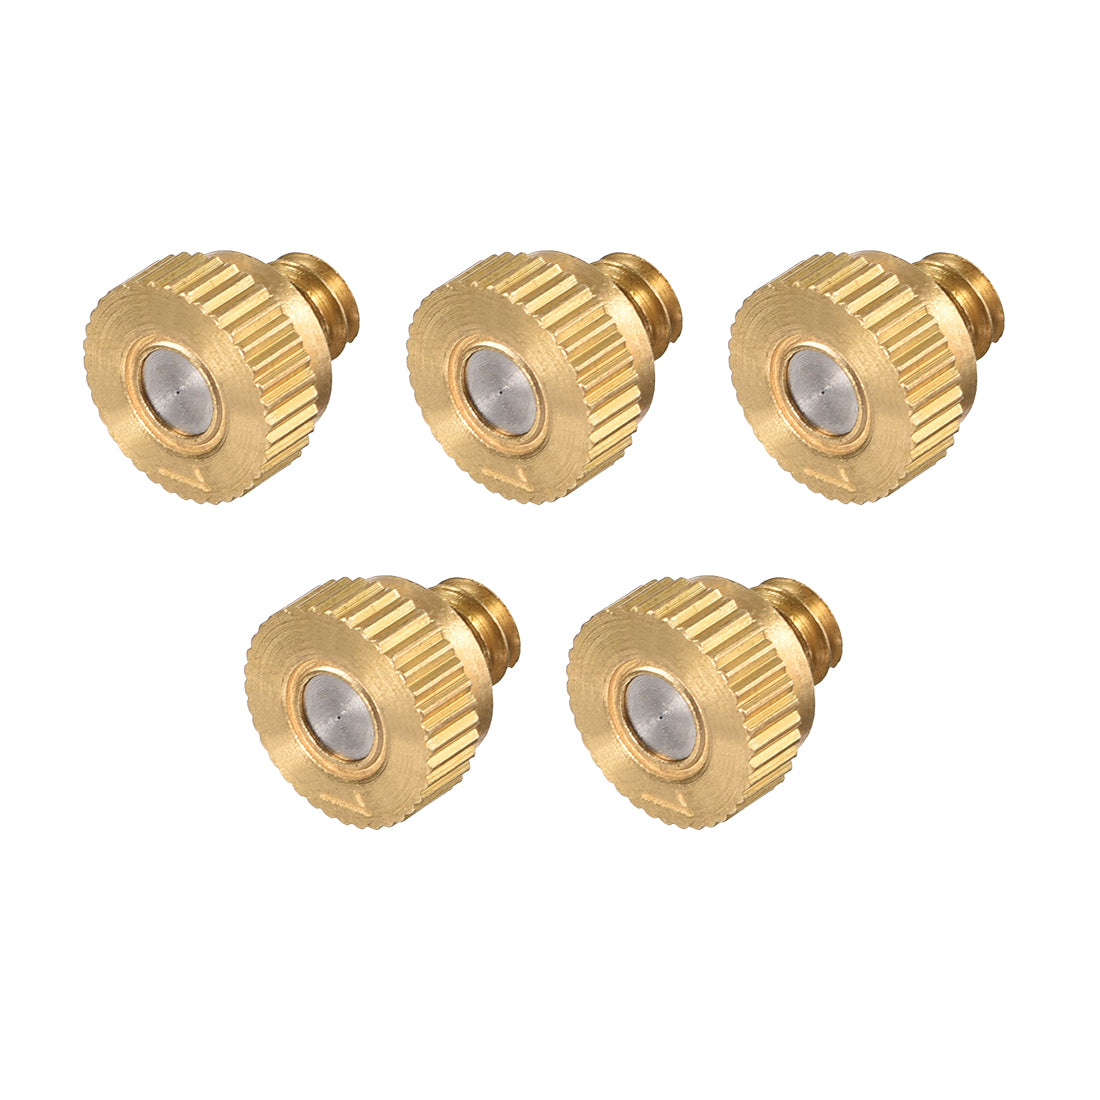 uxcell Uxcell Brass Misting Nozzle - 10/24 UNC 0.1mm Orifice Dia Replacement Heads for Outdoor Cooling System - 5 Pcs